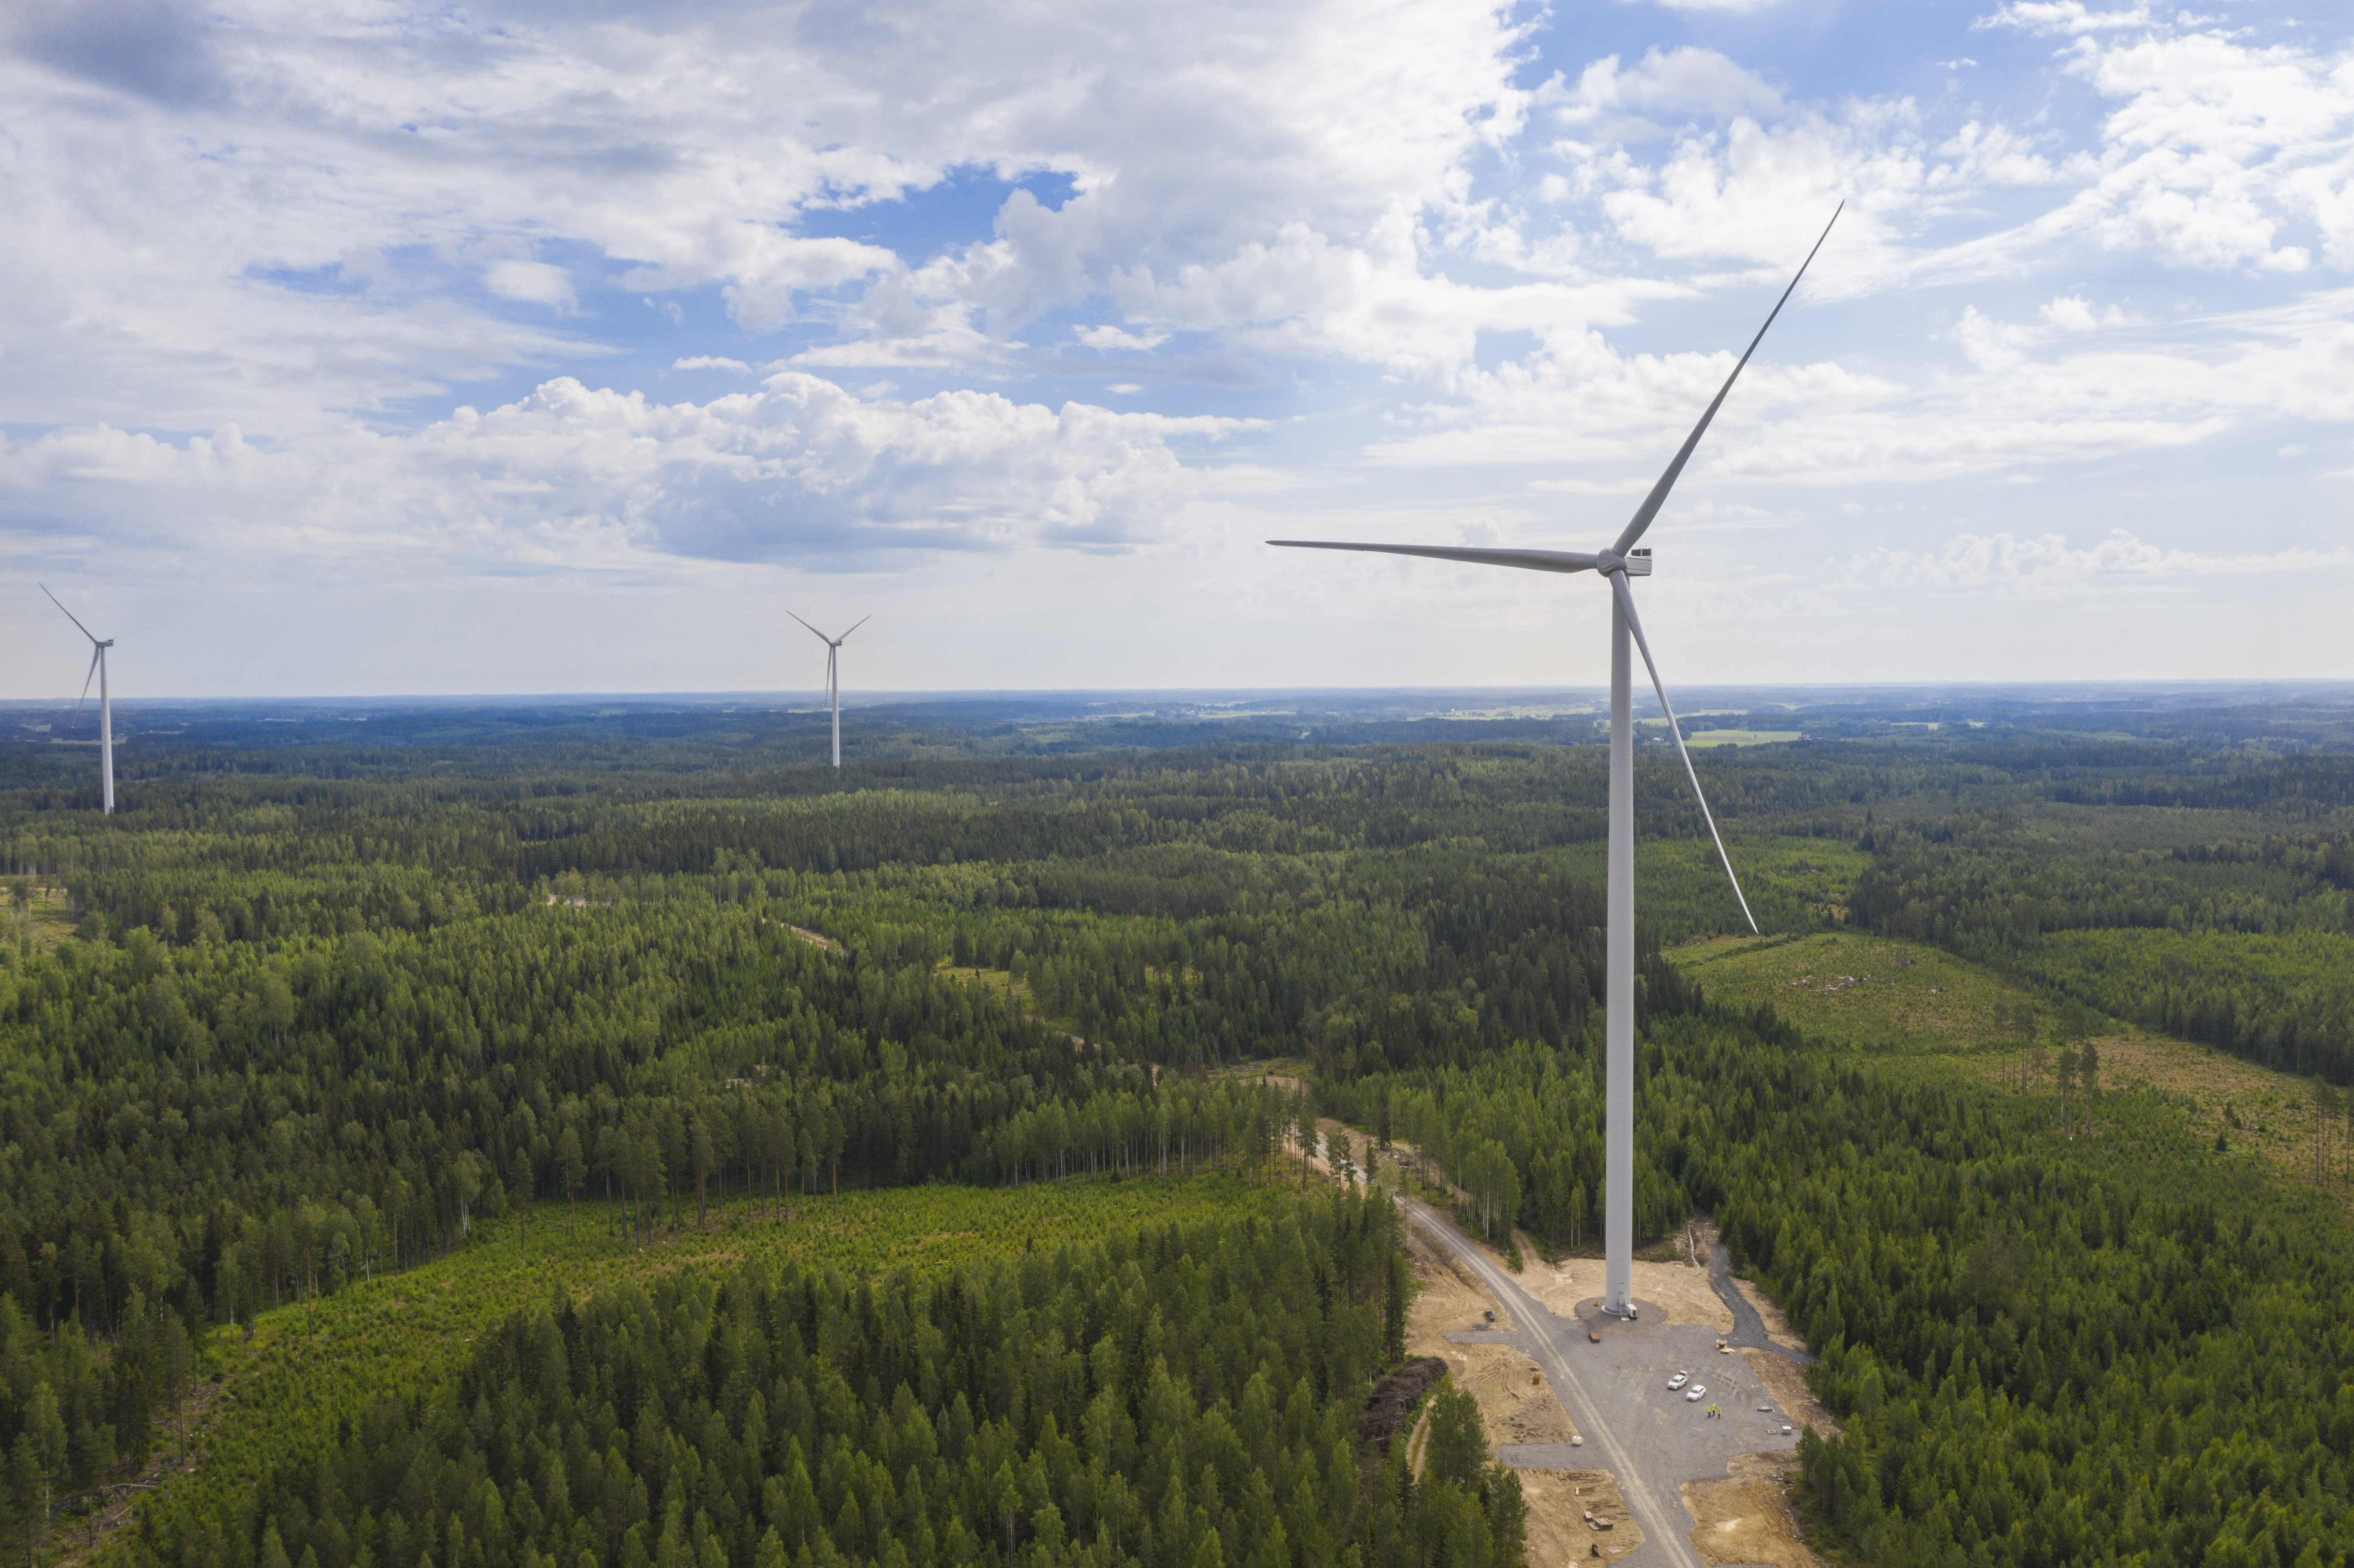 Sitra: The sea wind can help Finland achieve its climate goals